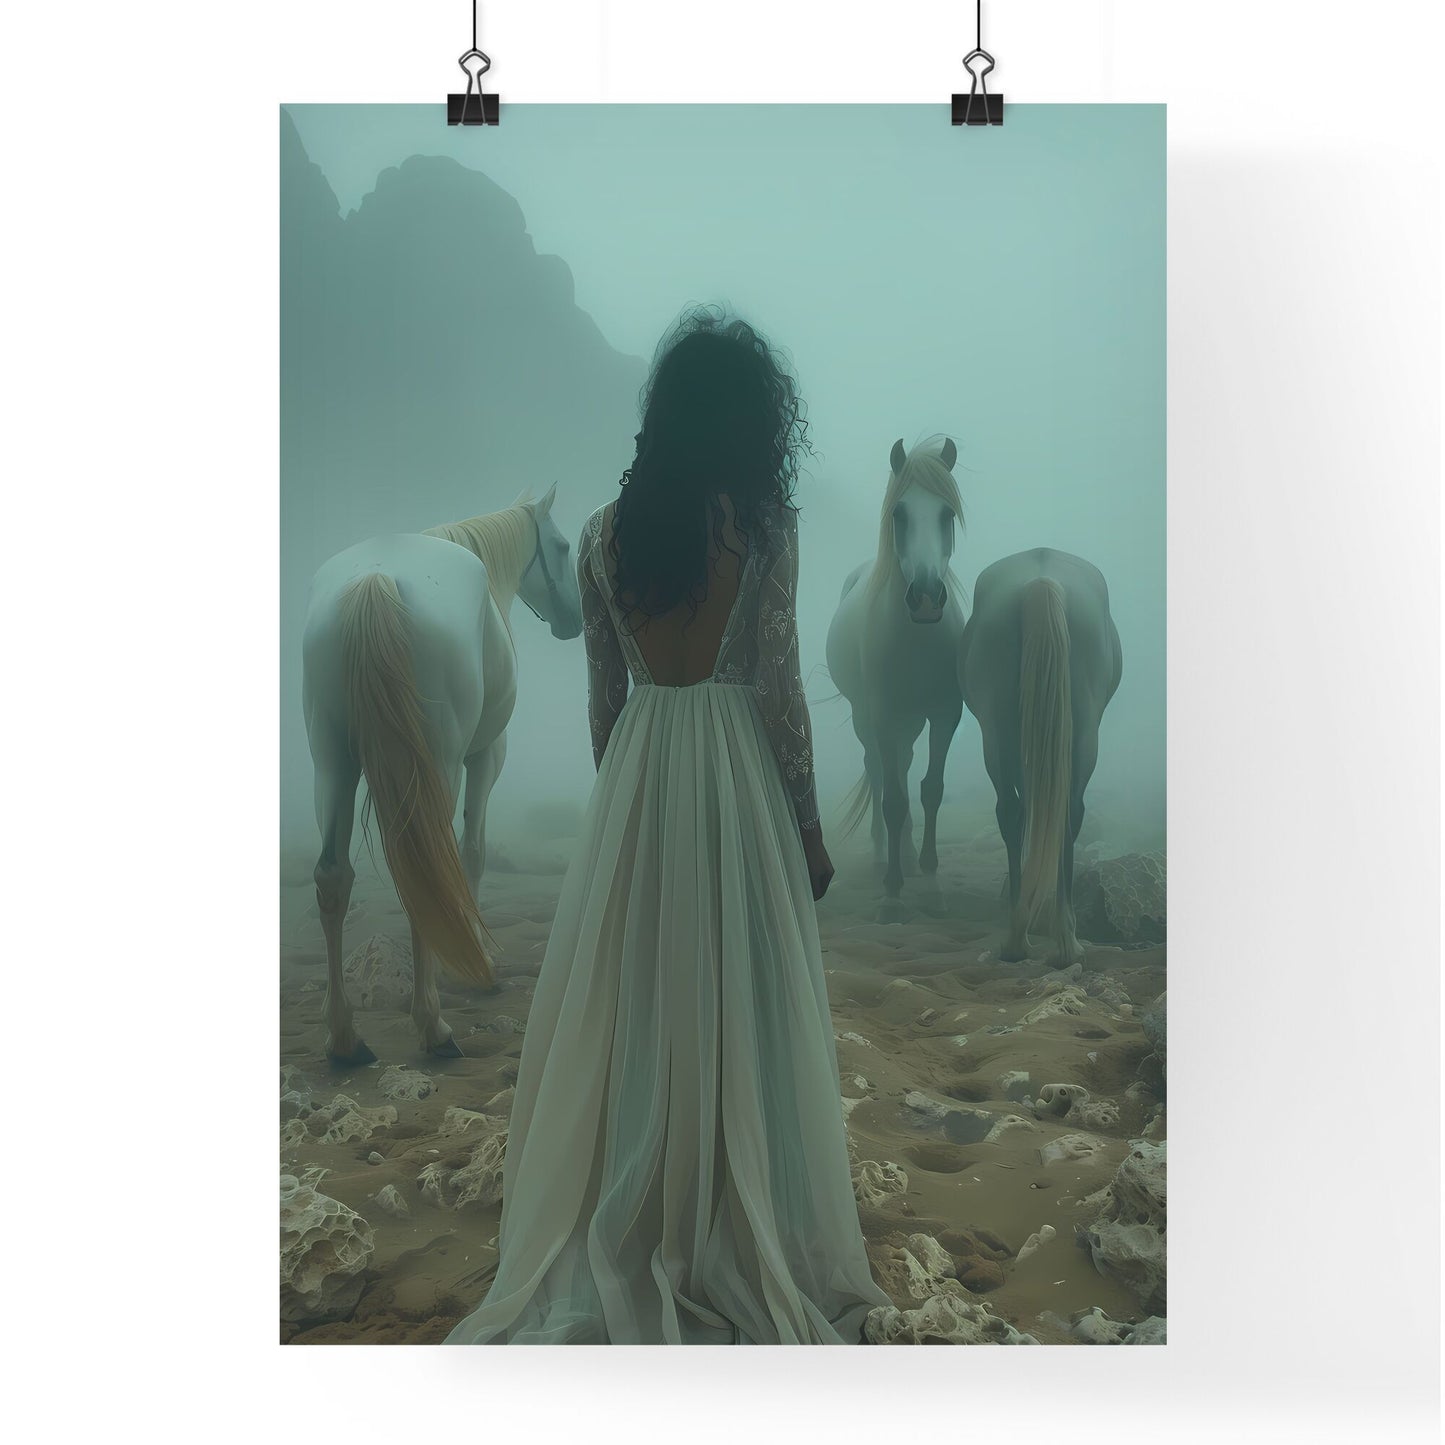 Enchanting Scene: Artistic Full Body Shot of 9-Year-Old Girl Playfully Engaging with Horses amidst a Aesthetic Fog in Sand Desert Default Title